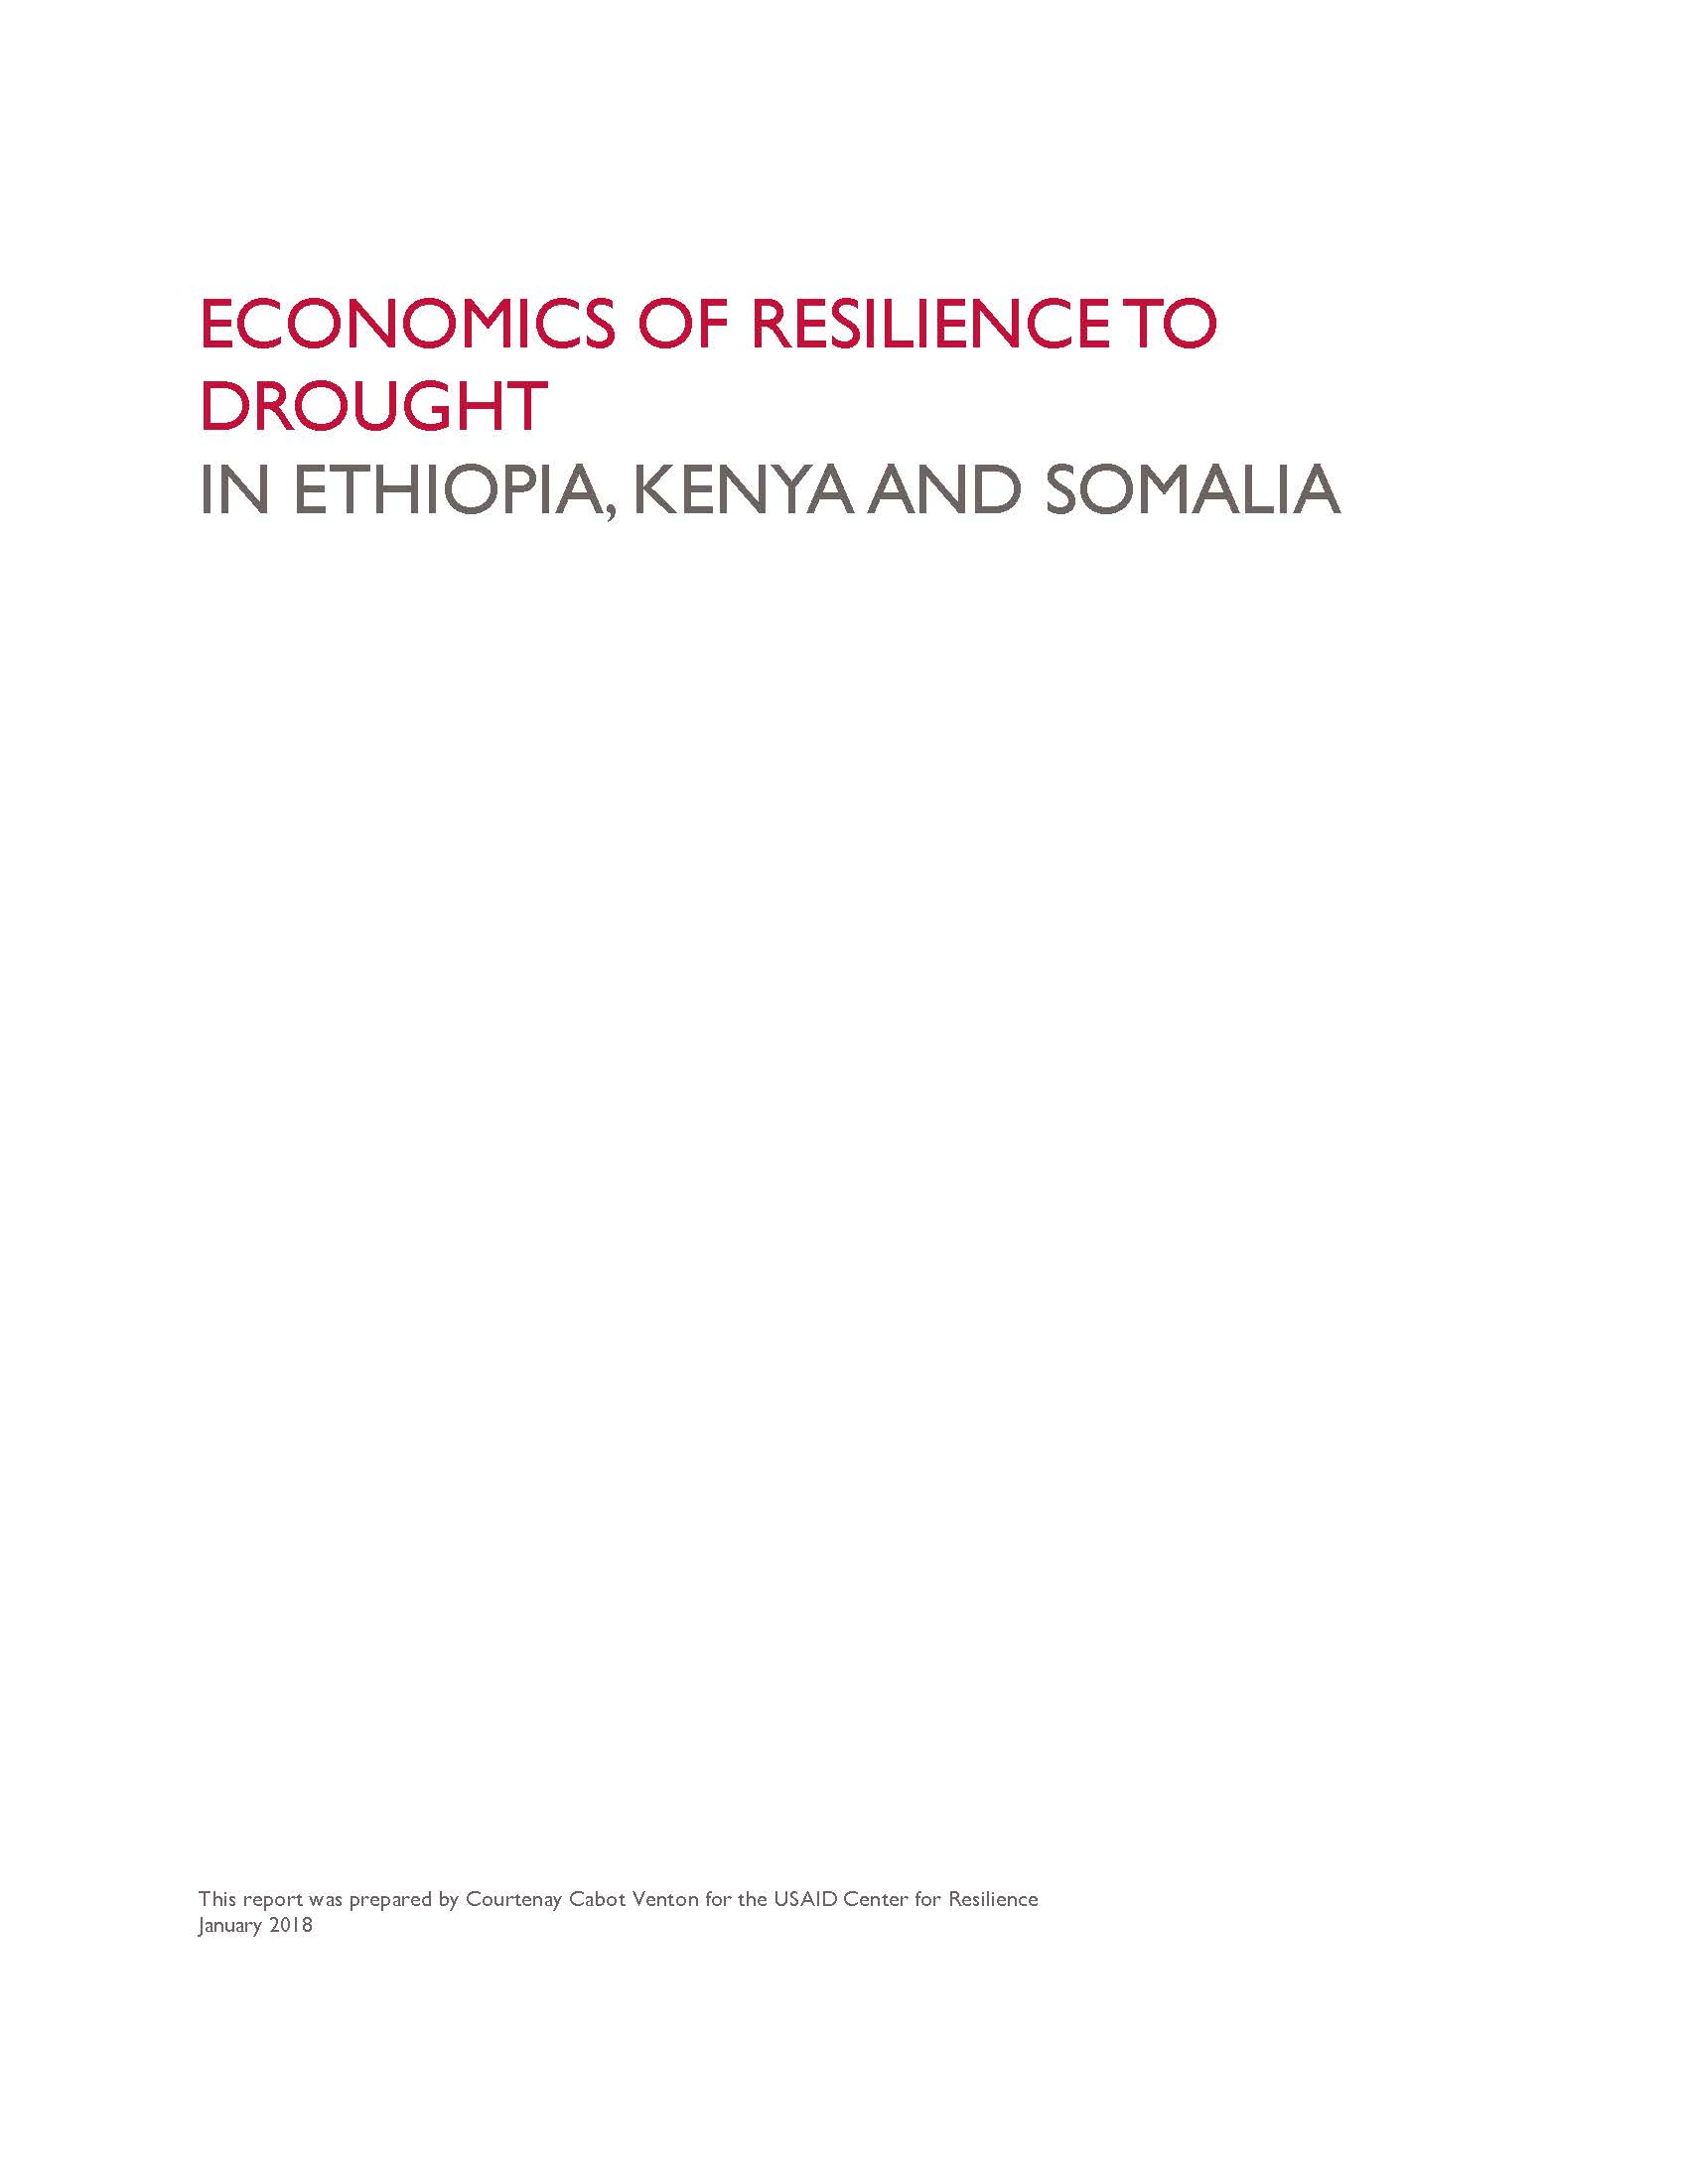 Economics of Resilience to Drought: Summary